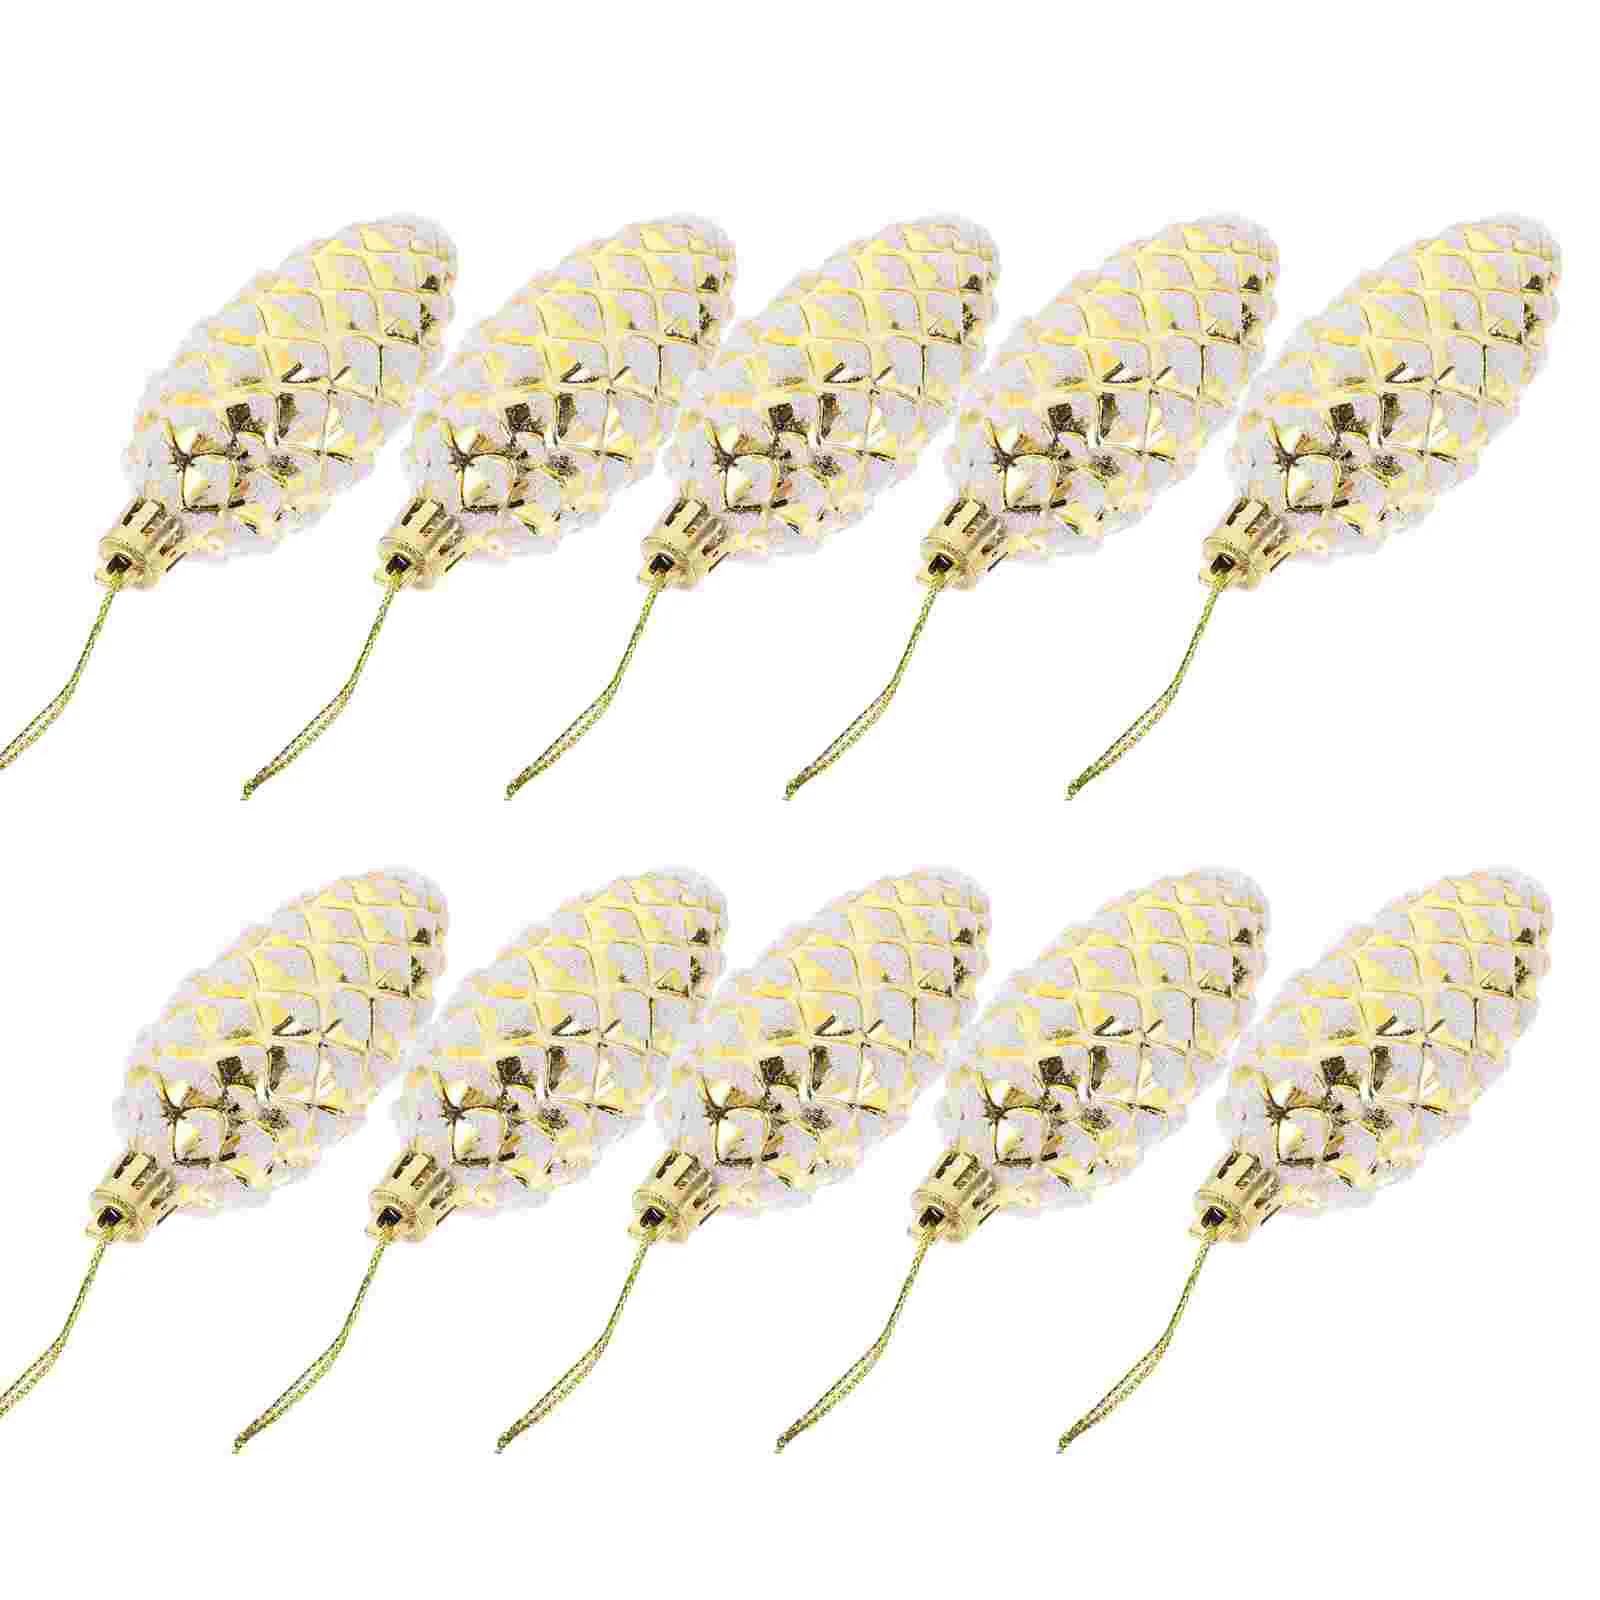 

10pcs Pine Cones Pendant Charms Christmas Tree Ornaments Xmas Party Hanging Decorations